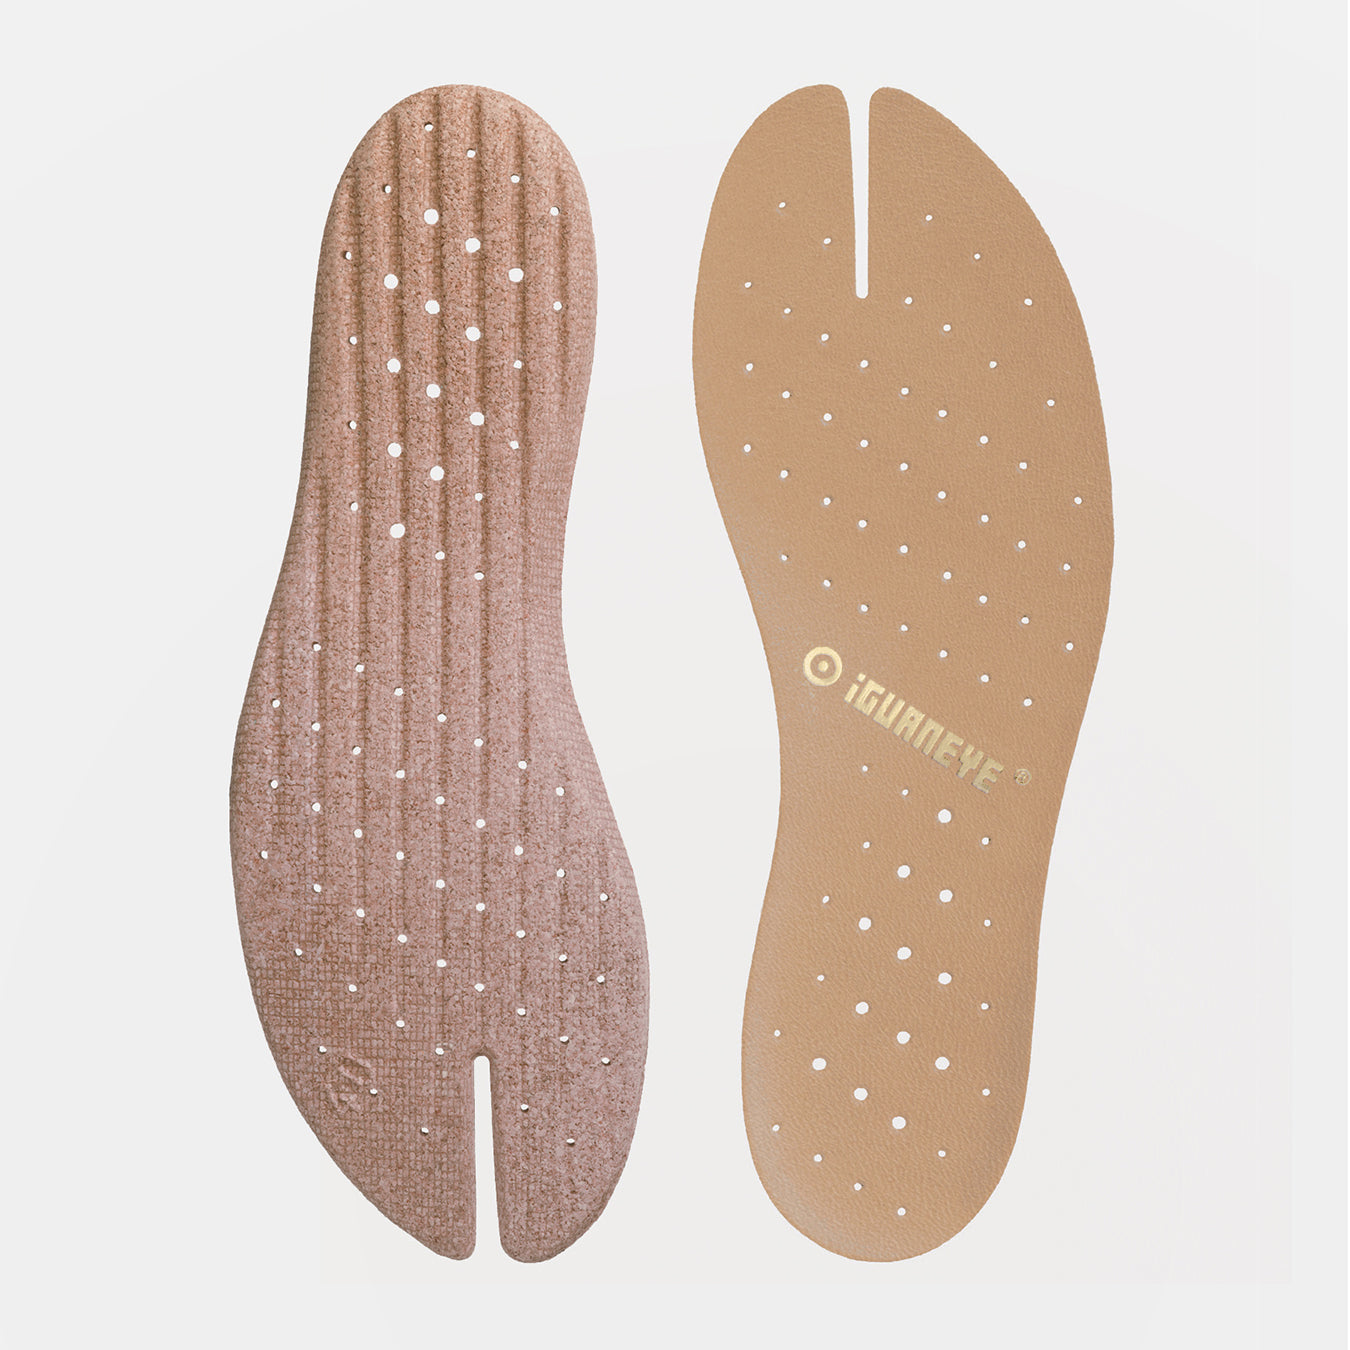 Suede Leather and cork insoles Freshoes Natural Beige – iGUANEYE